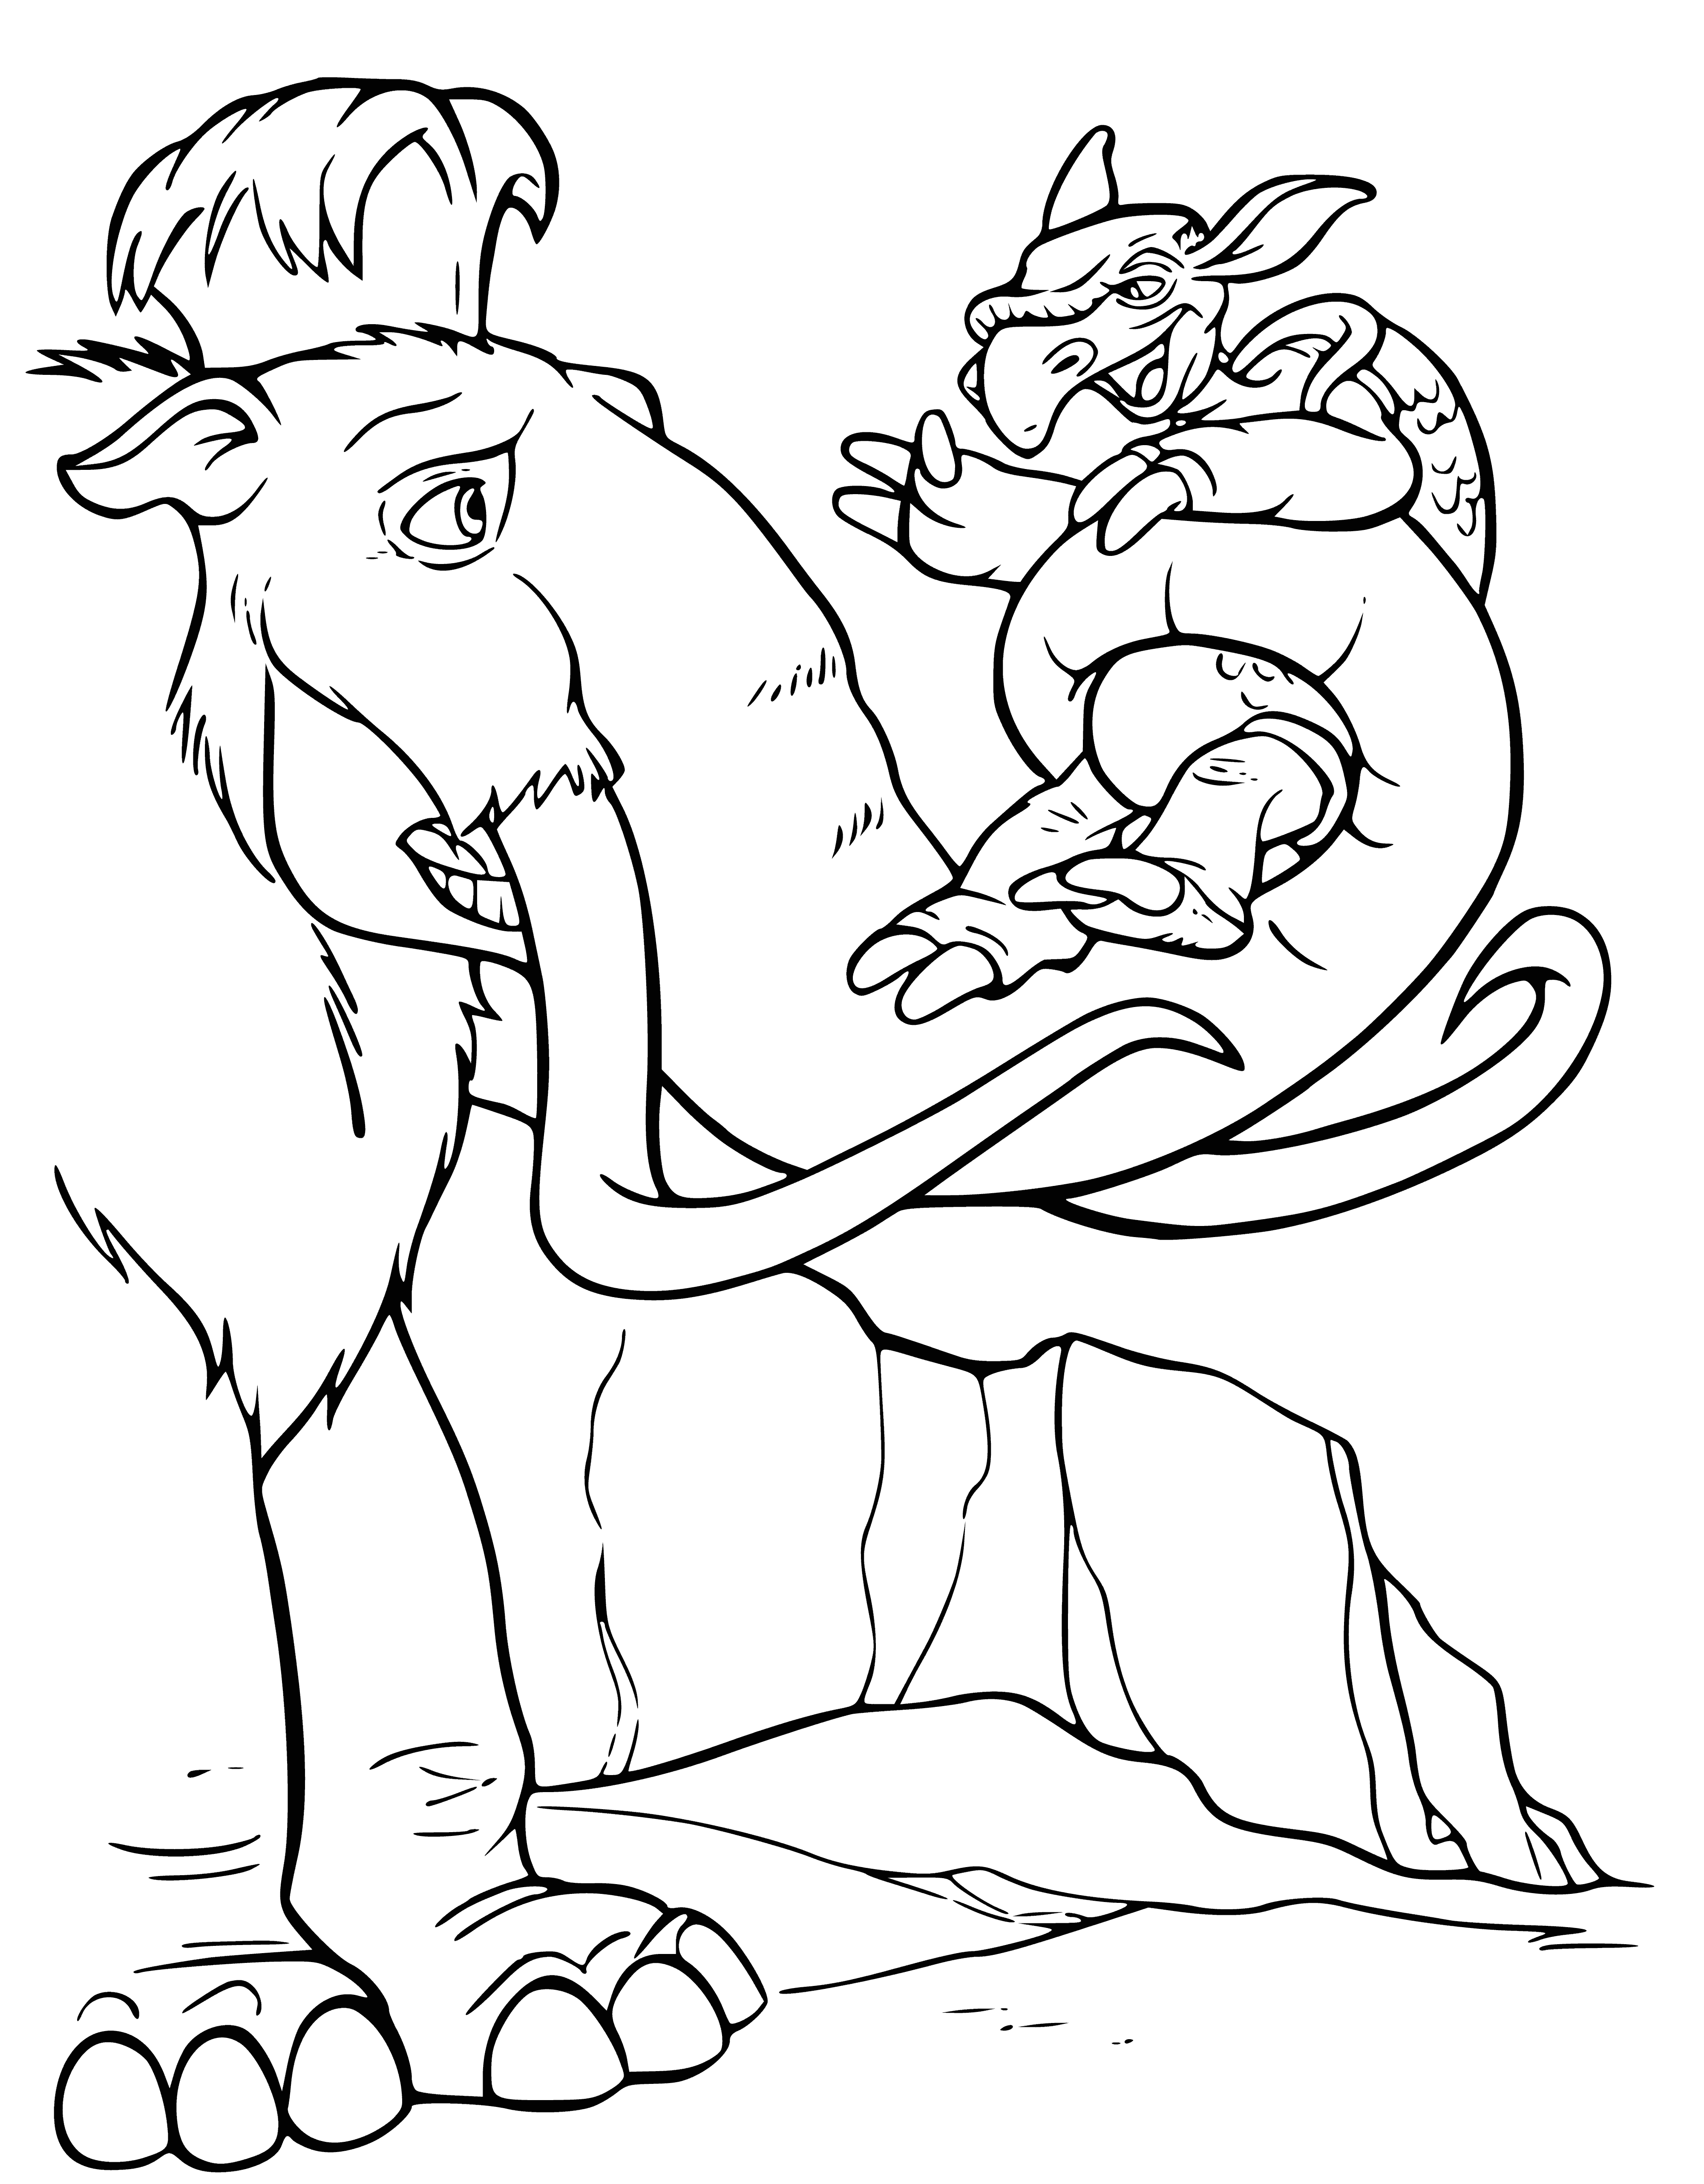 Manny and the turtle coloring page